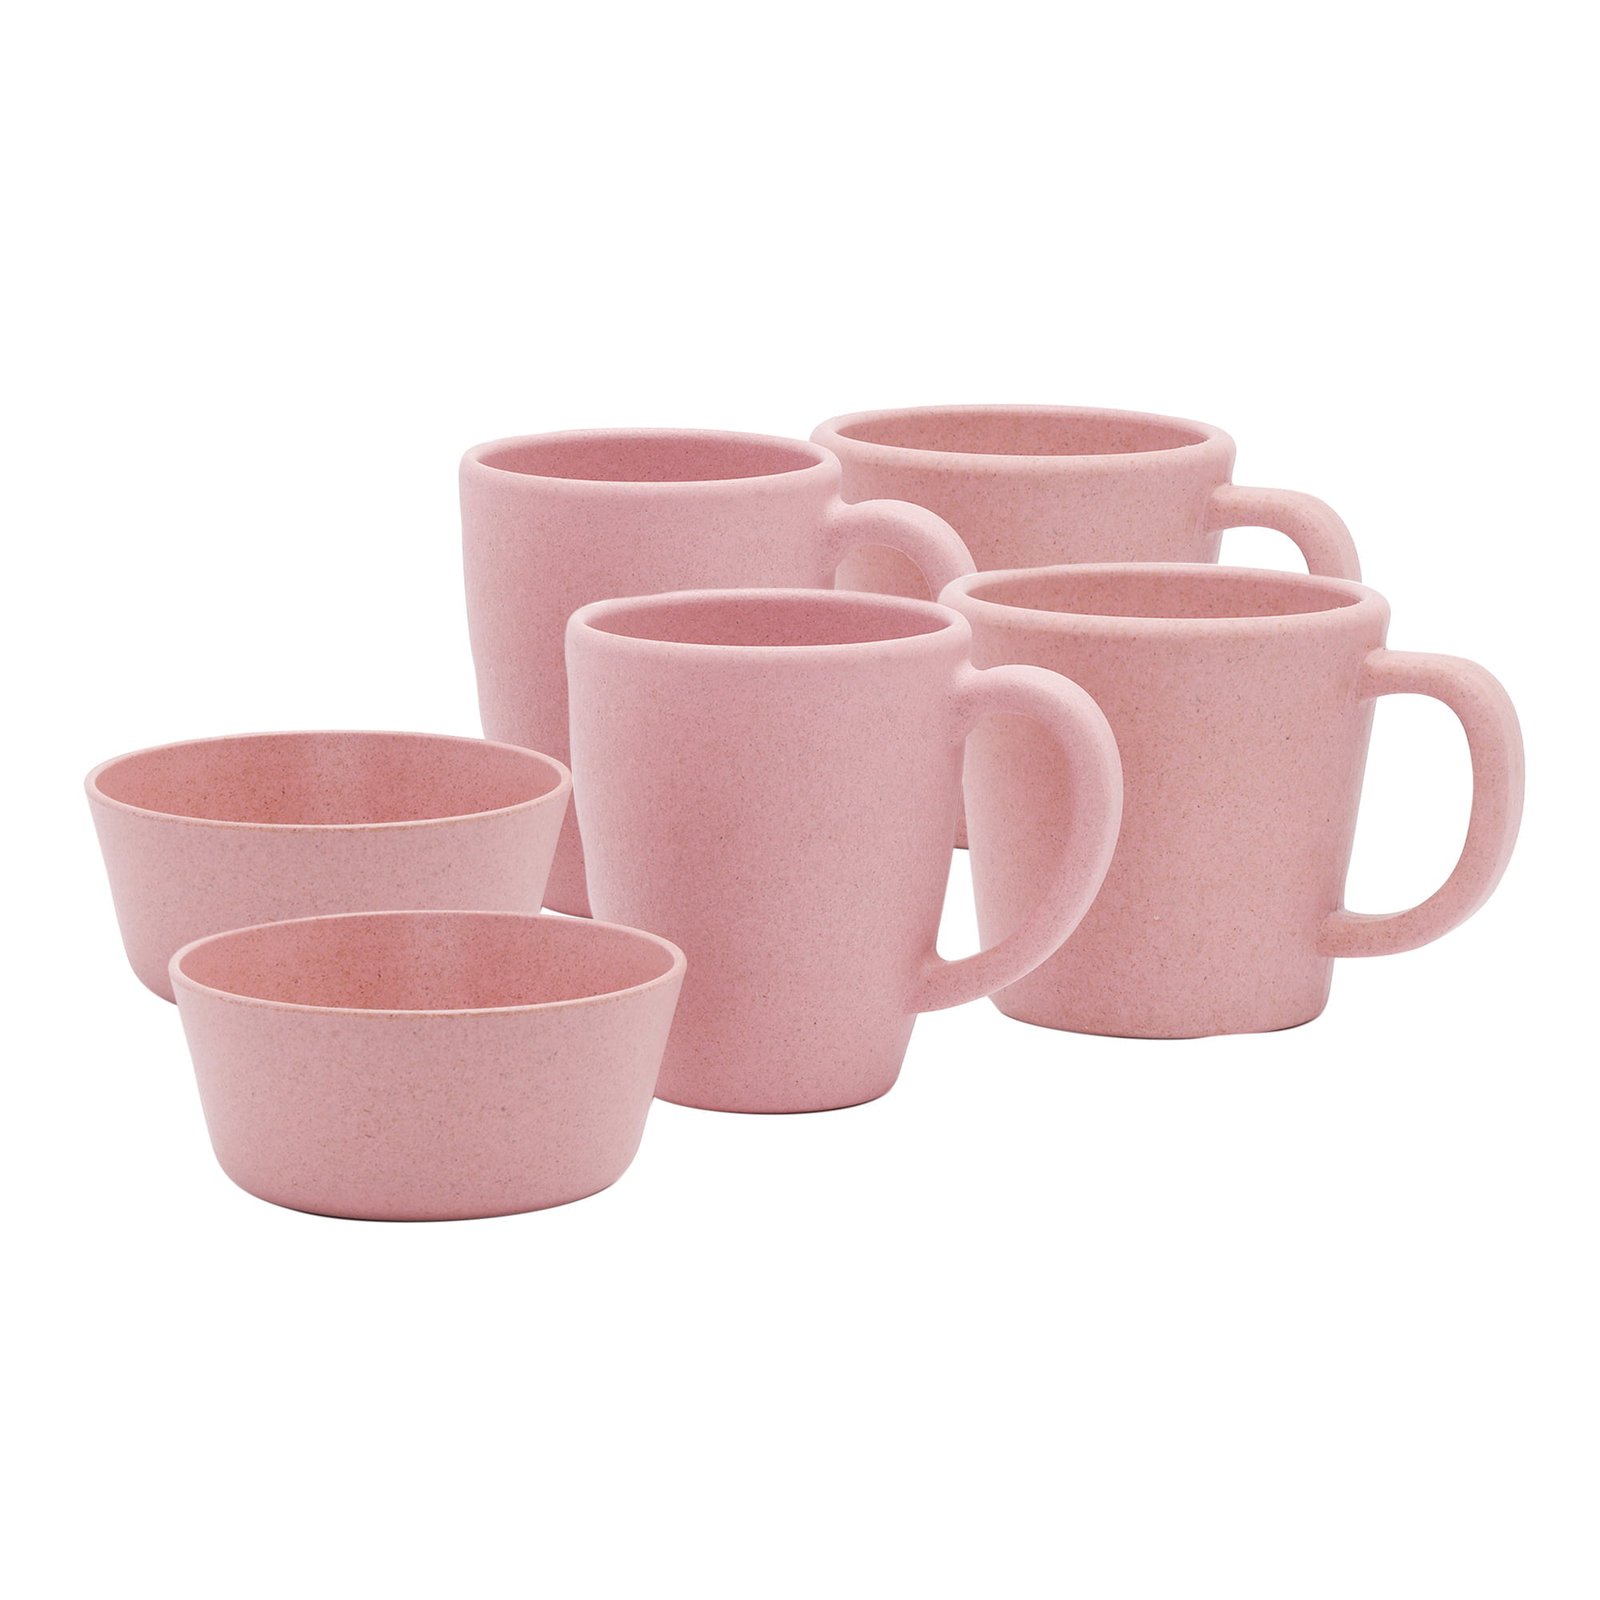 pink coffee mugs and bowls in white background